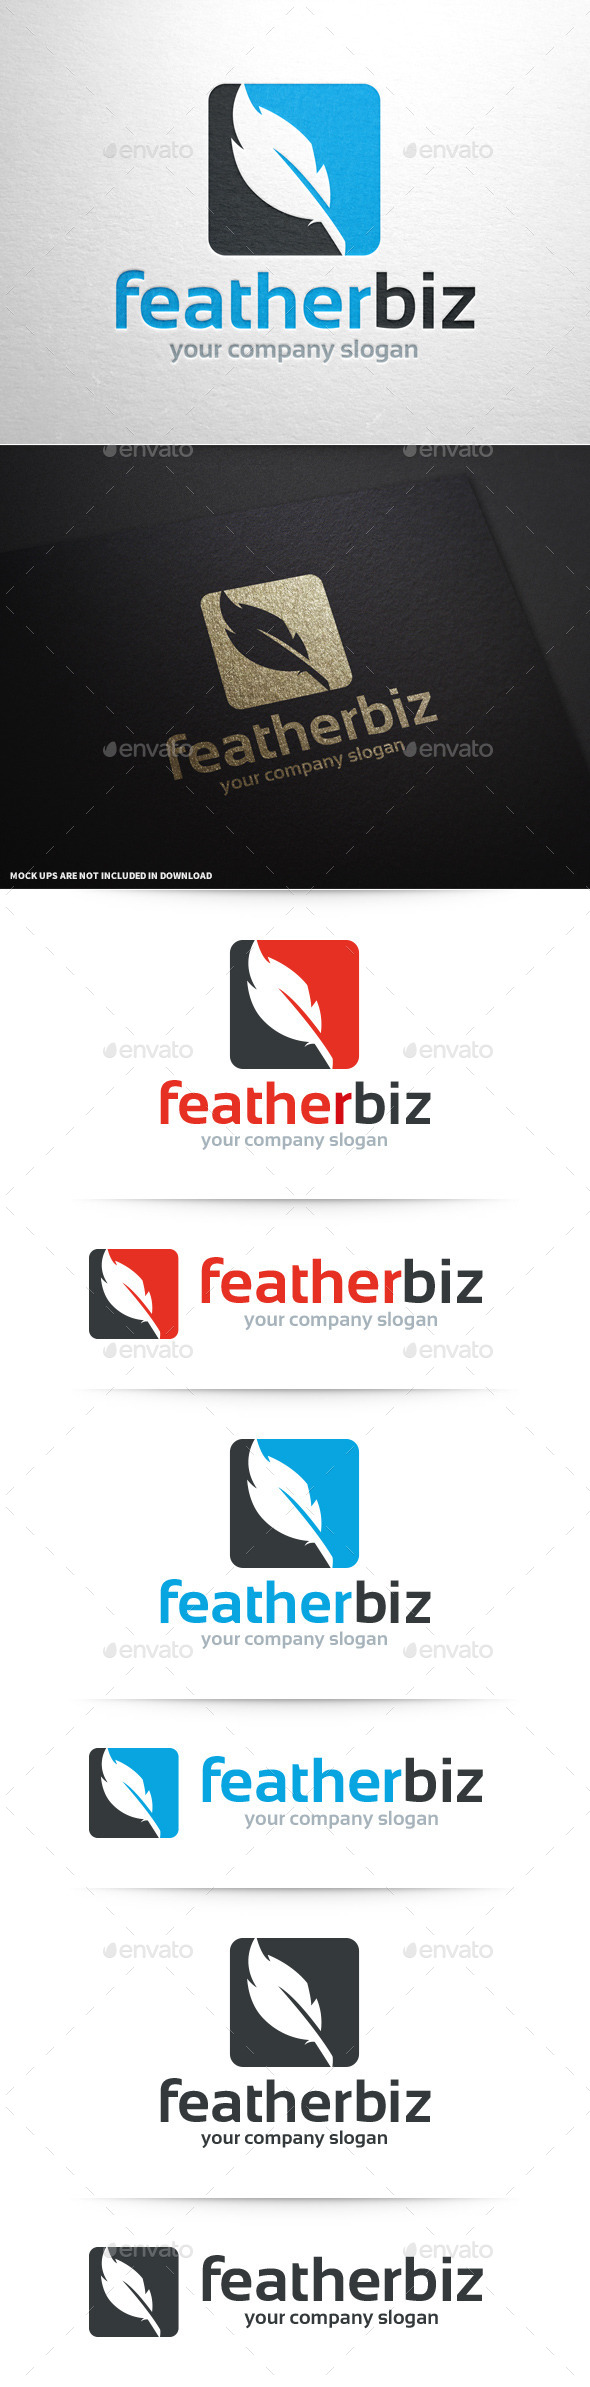 BUSINESS OBJECT Logo Template photo - 1